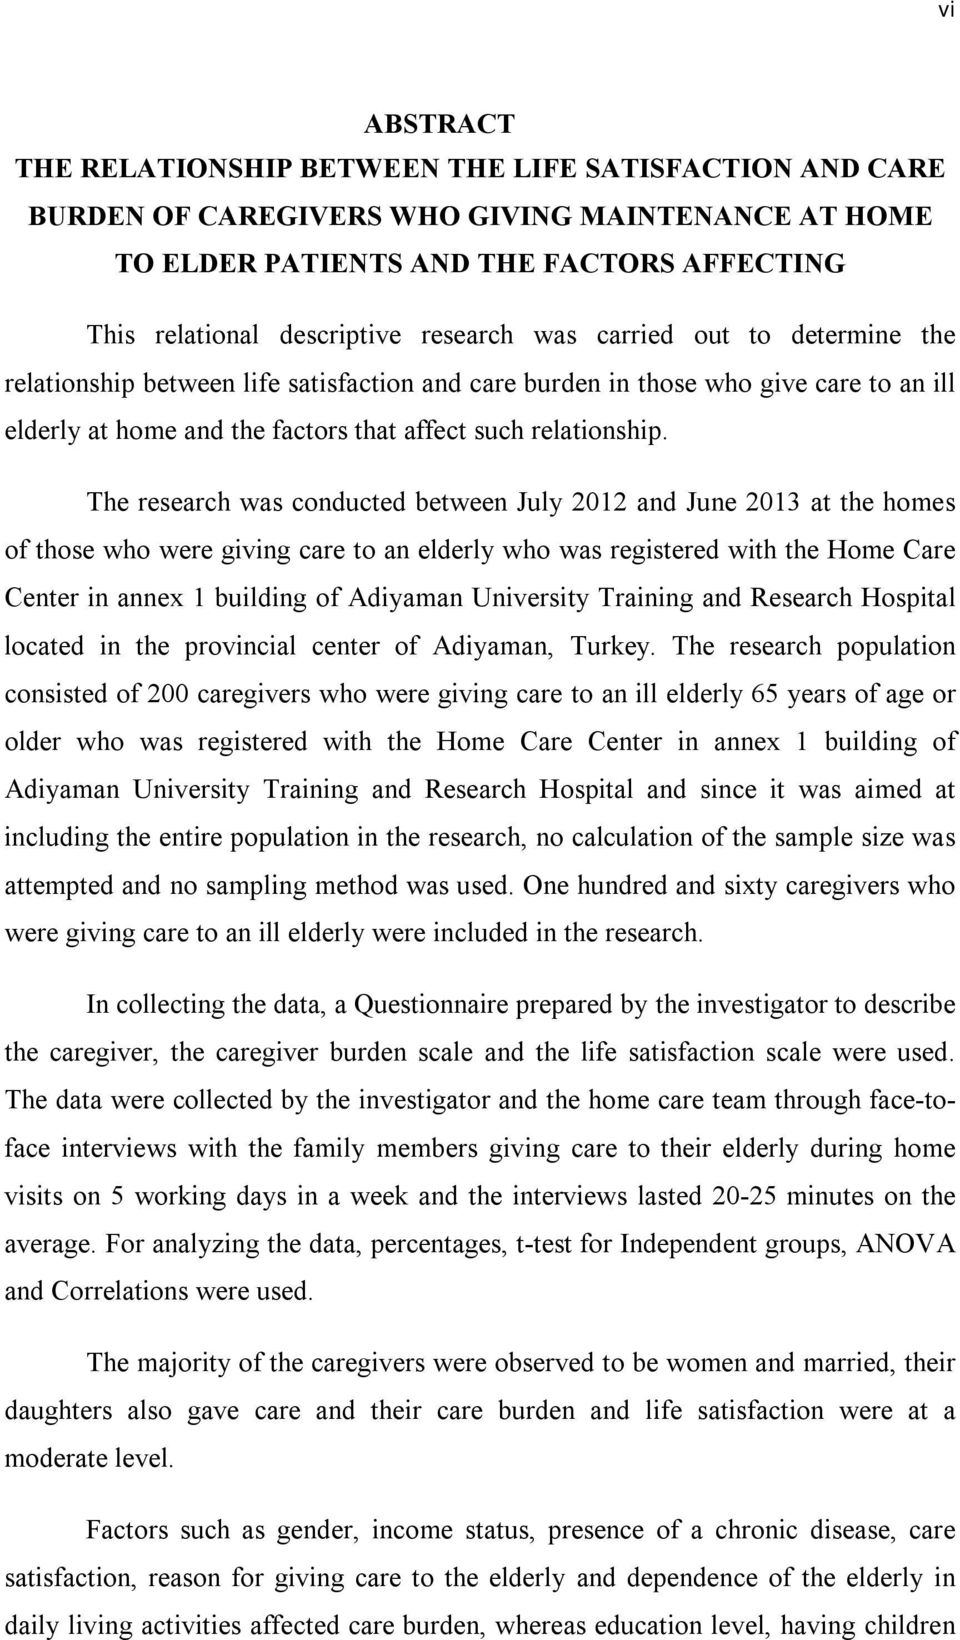 The research was conducted between July 2012 and June 2013 at the homes of those who were giving care to an elderly who was registered with the Home Care Center in annex 1 building of Adiyaman